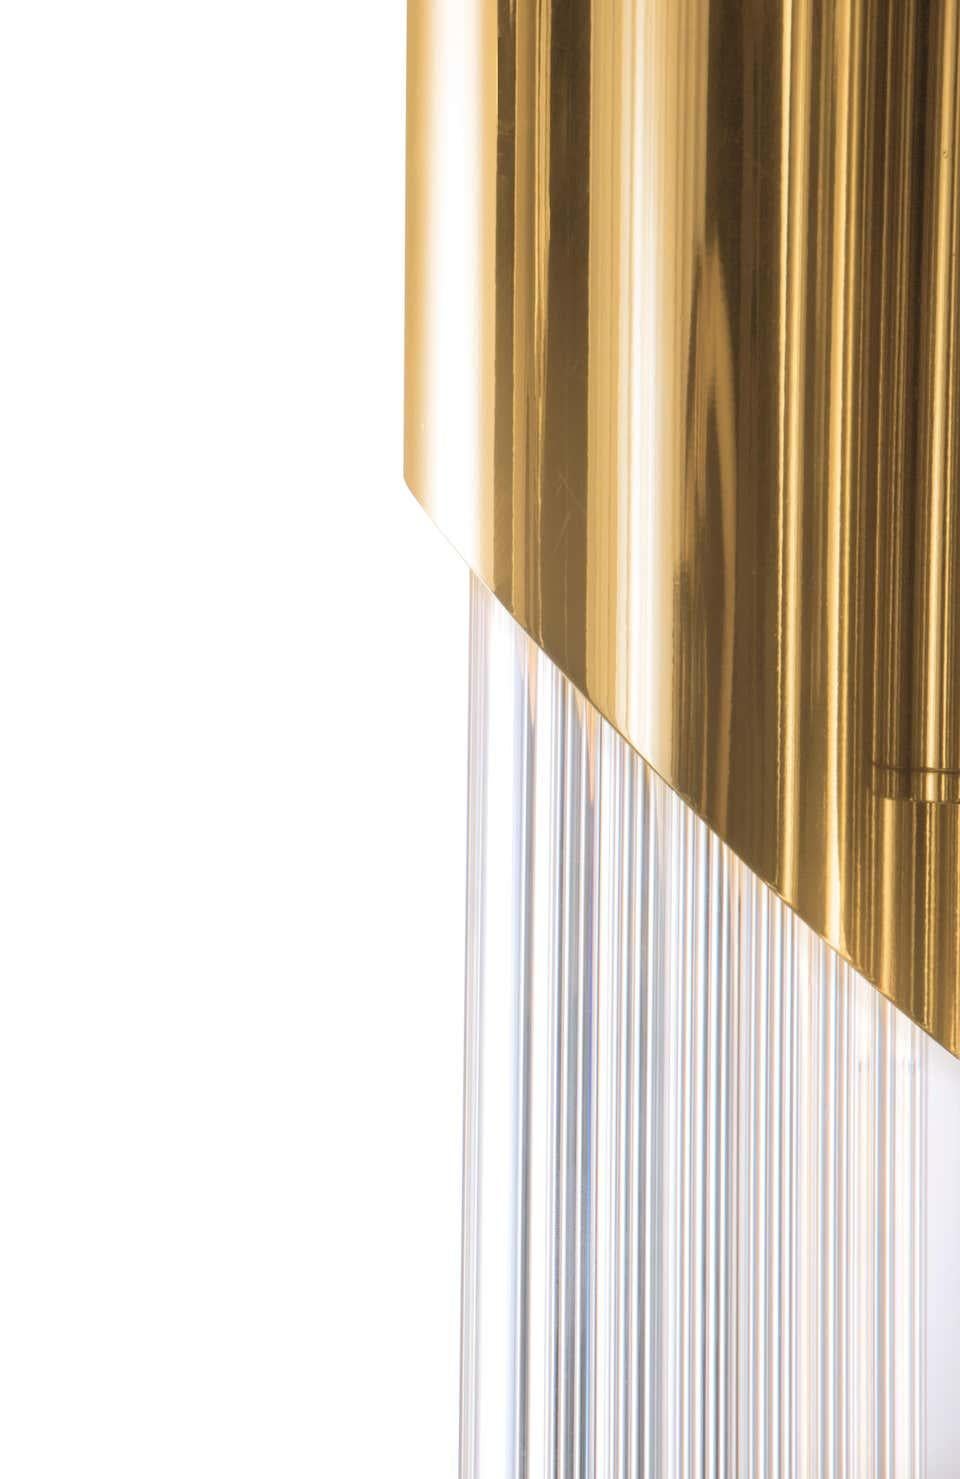 Its structure has 3 tubes like the original inspiration made in brass and crystal glass. Transmitting elegance and purity to every space, the reception or lobby areas can be a perfect place for this gorgeous masterpiece.

Materials
Body: Brass and